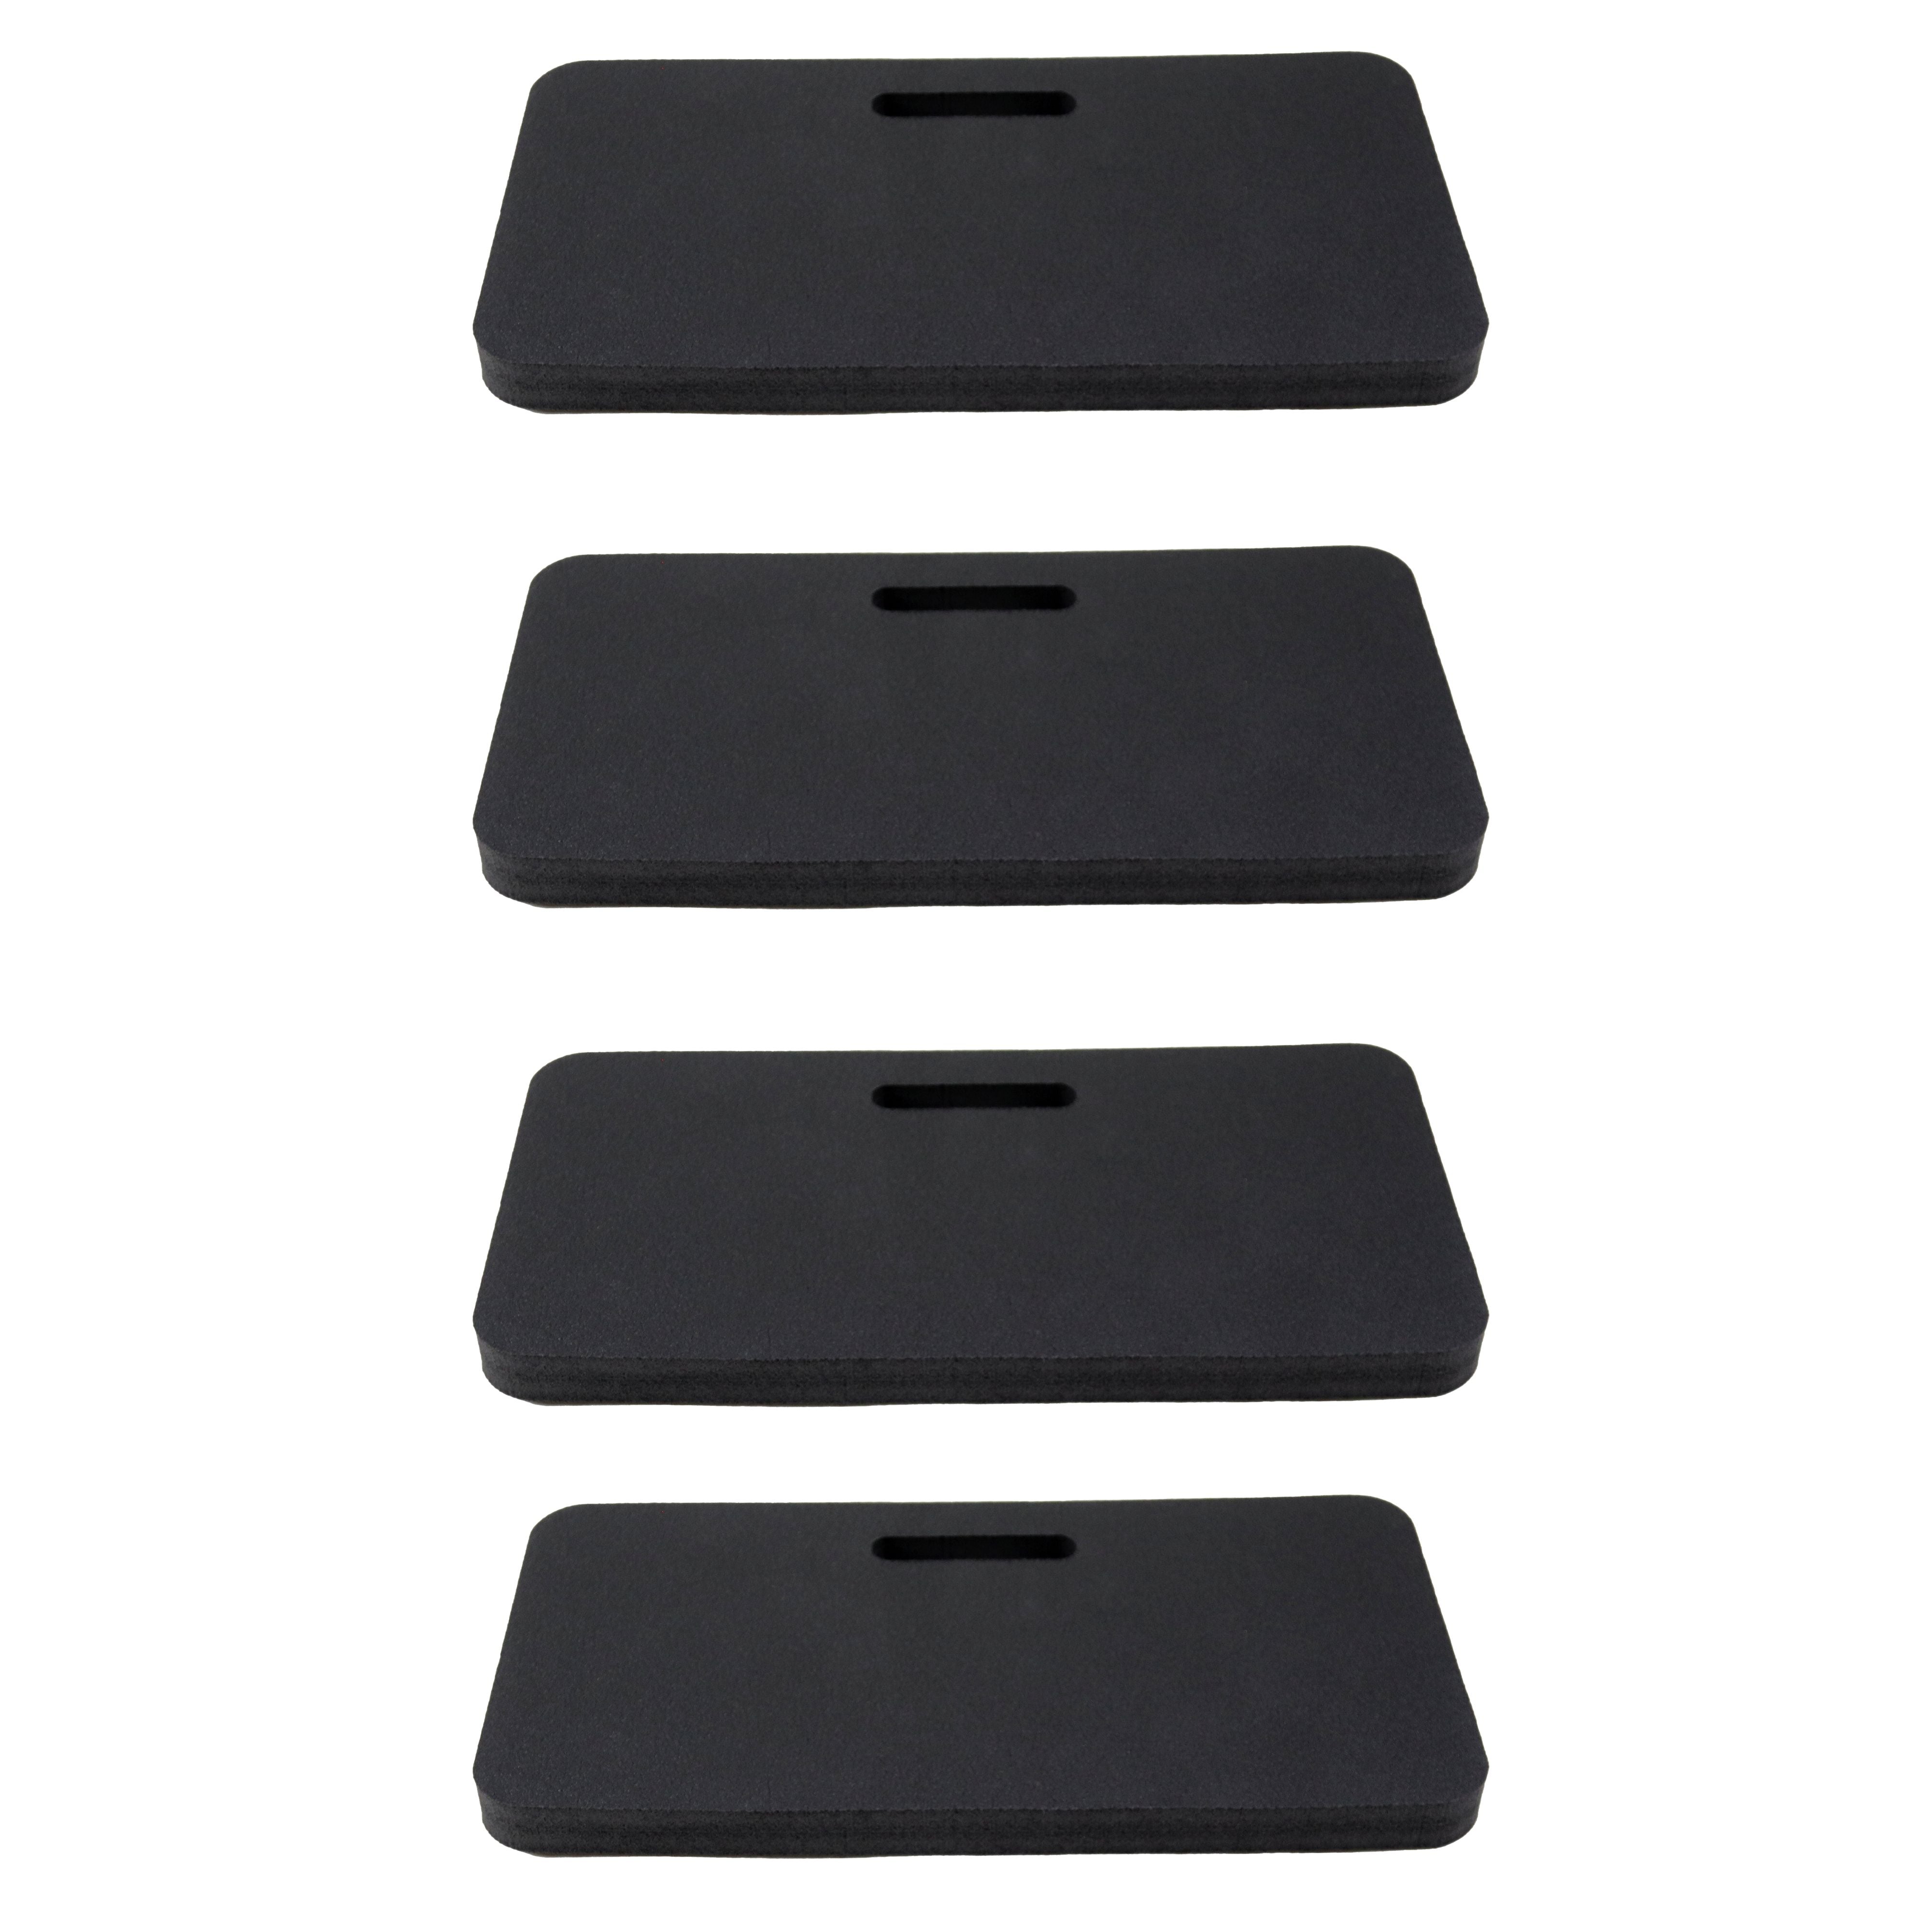 4 Portable Knee Cushions for Home Garden Work Automotive Workshop and More Durable Thick Comfortable High Density Waterproof Black Foam 16 x 8 Inches Kneeling Pad